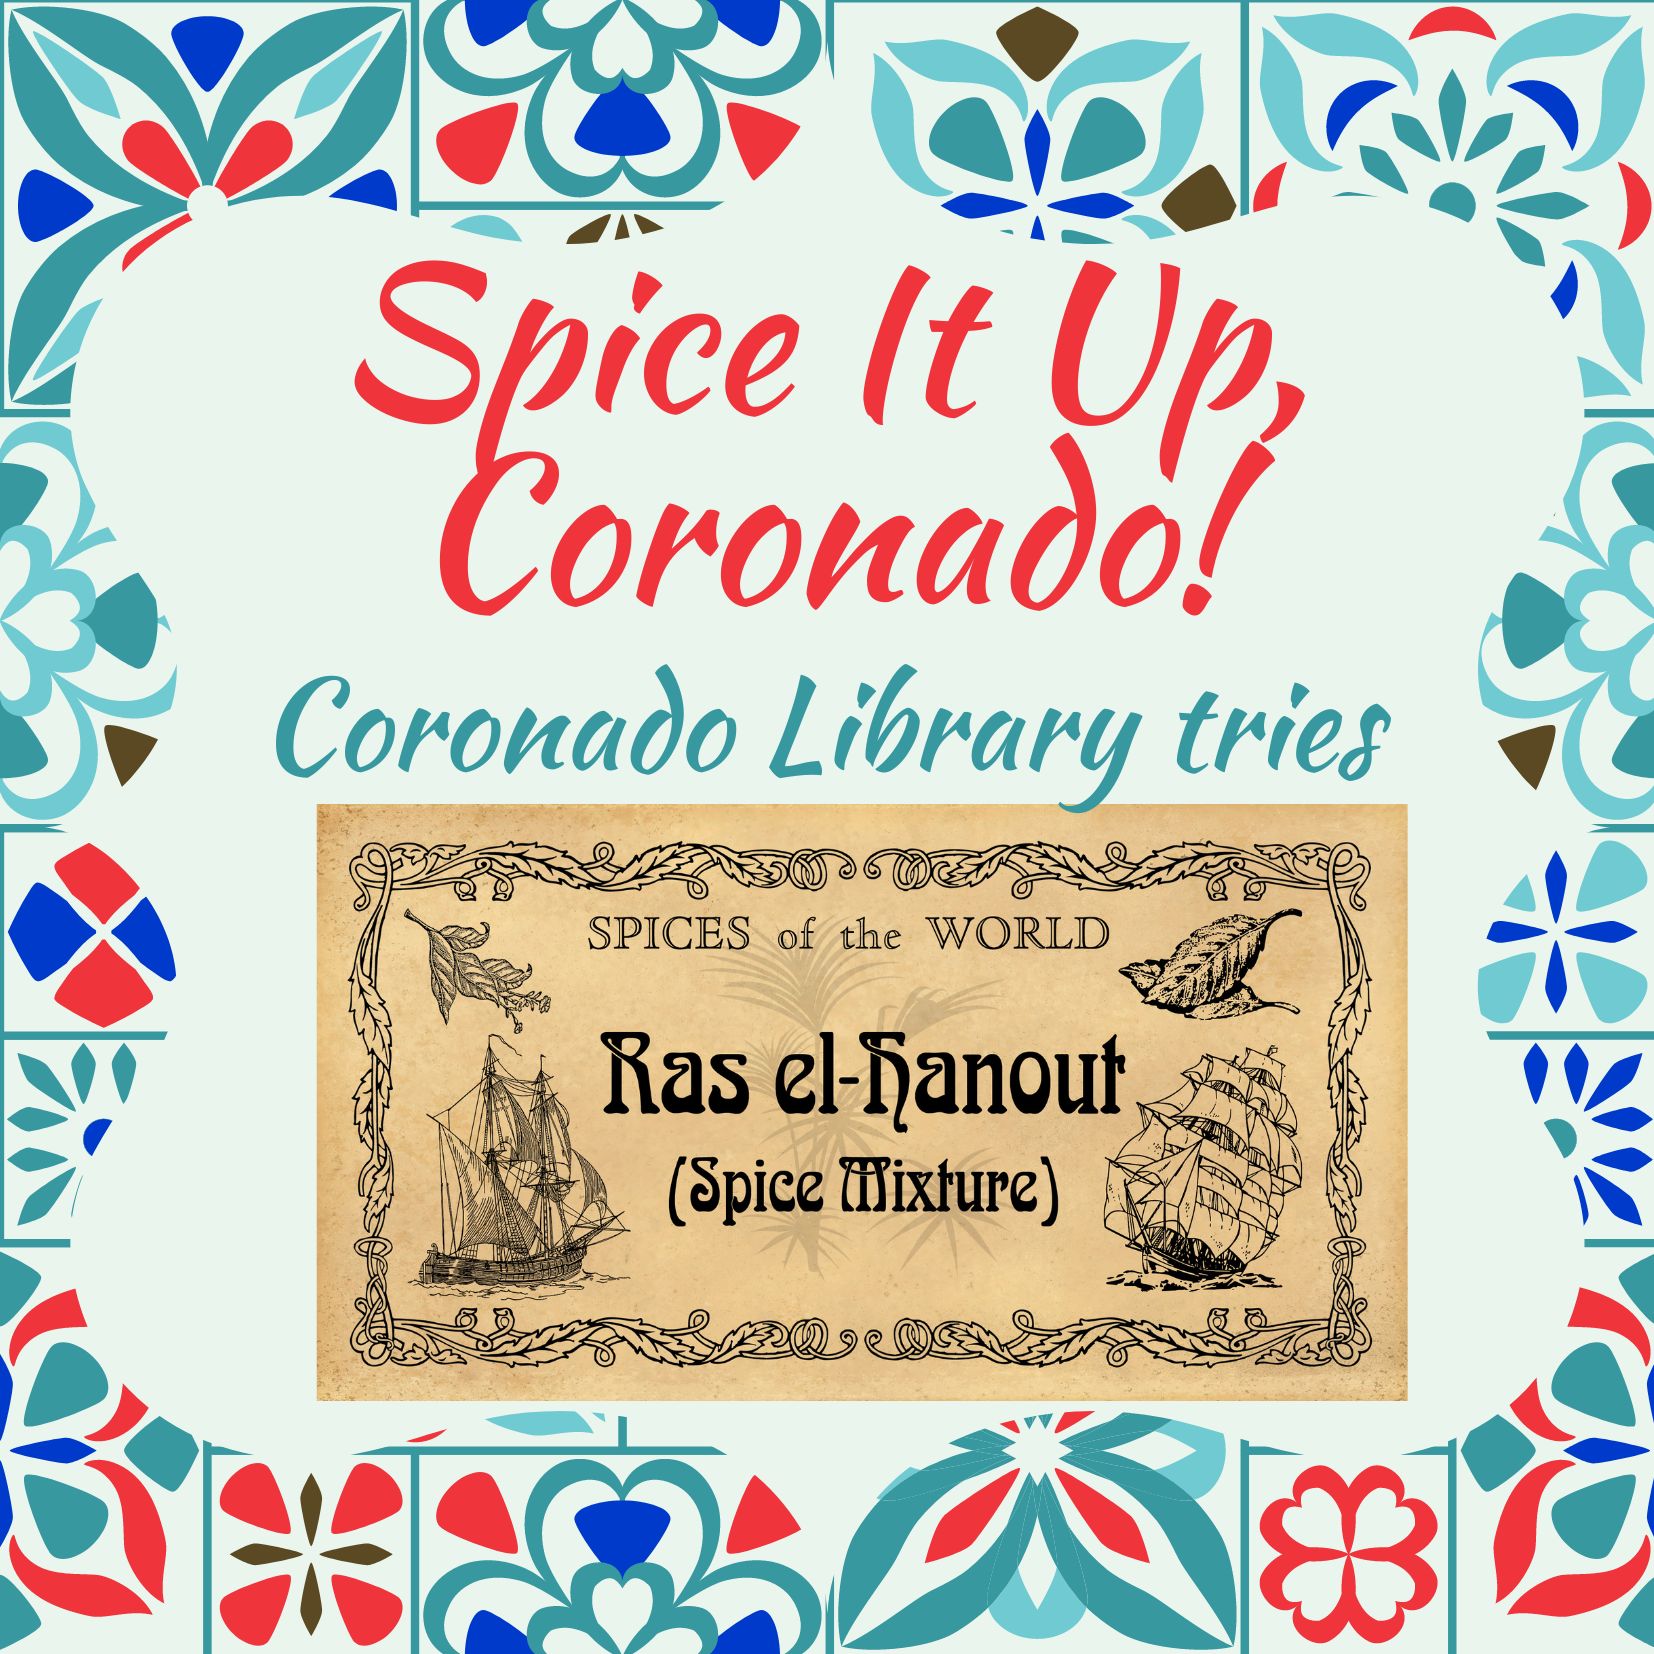 A colorful background with the words: "Spice It Up, Coronado! Coronado Library tries" Below is a tan banner with the words: Spices of the World / Ras el Hanout (Spice Mixture). There are ships on the banner. 